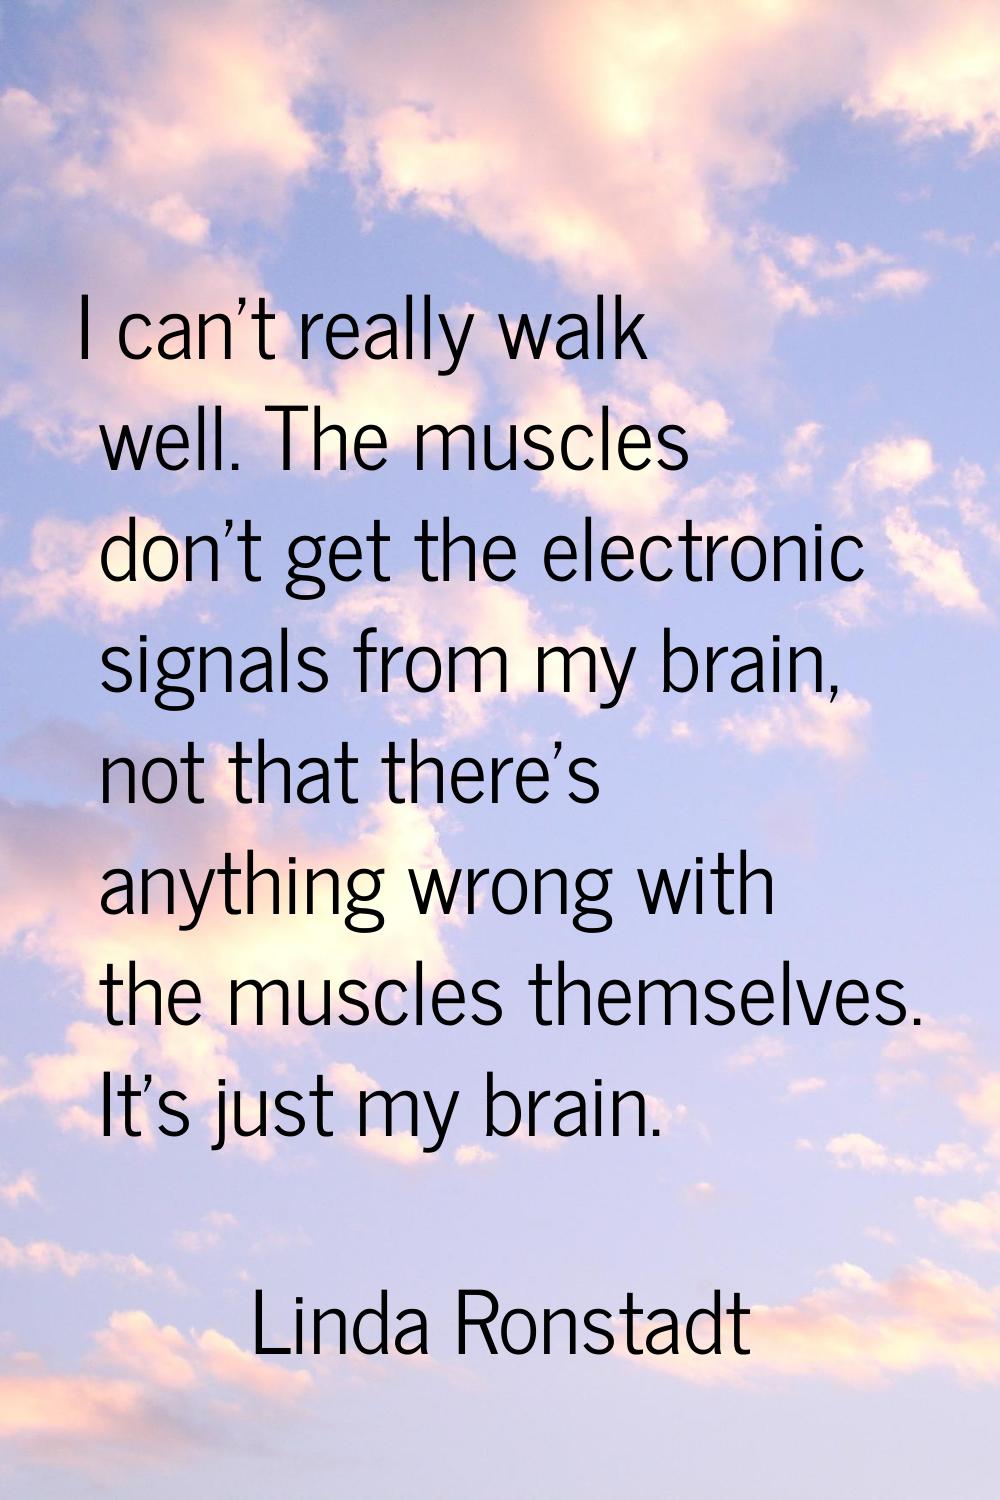 I can't really walk well. The muscles don't get the electronic signals from my brain, not that ther